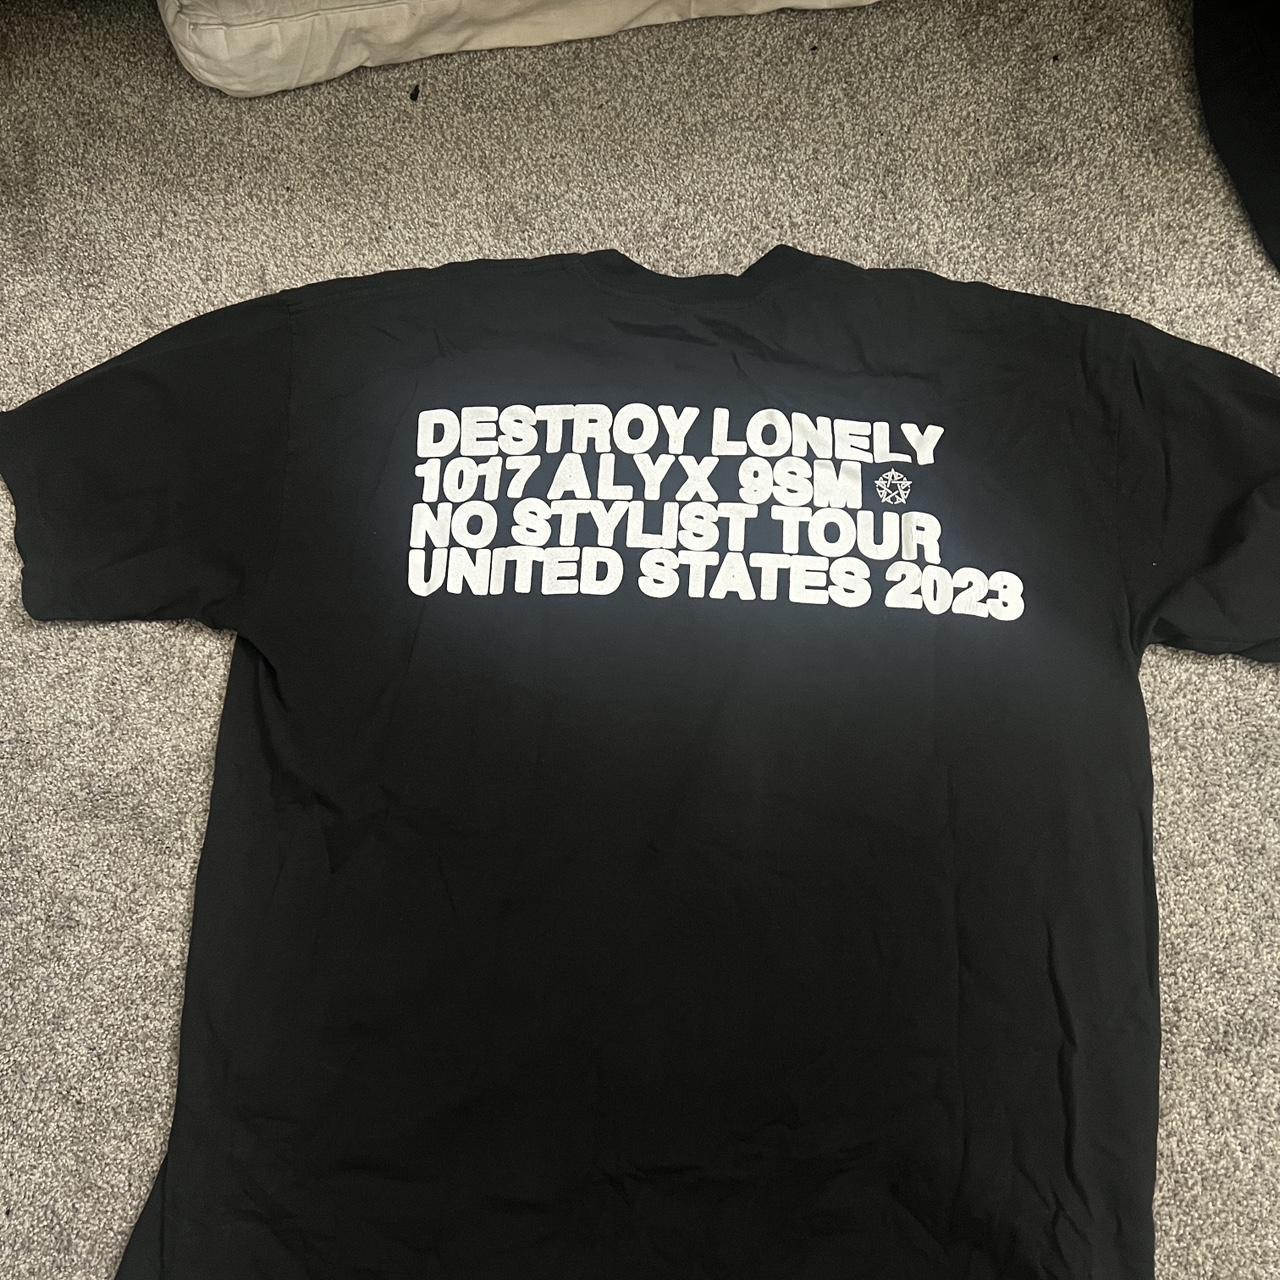 Destroy lonely X alyx shirt from tour - Depop